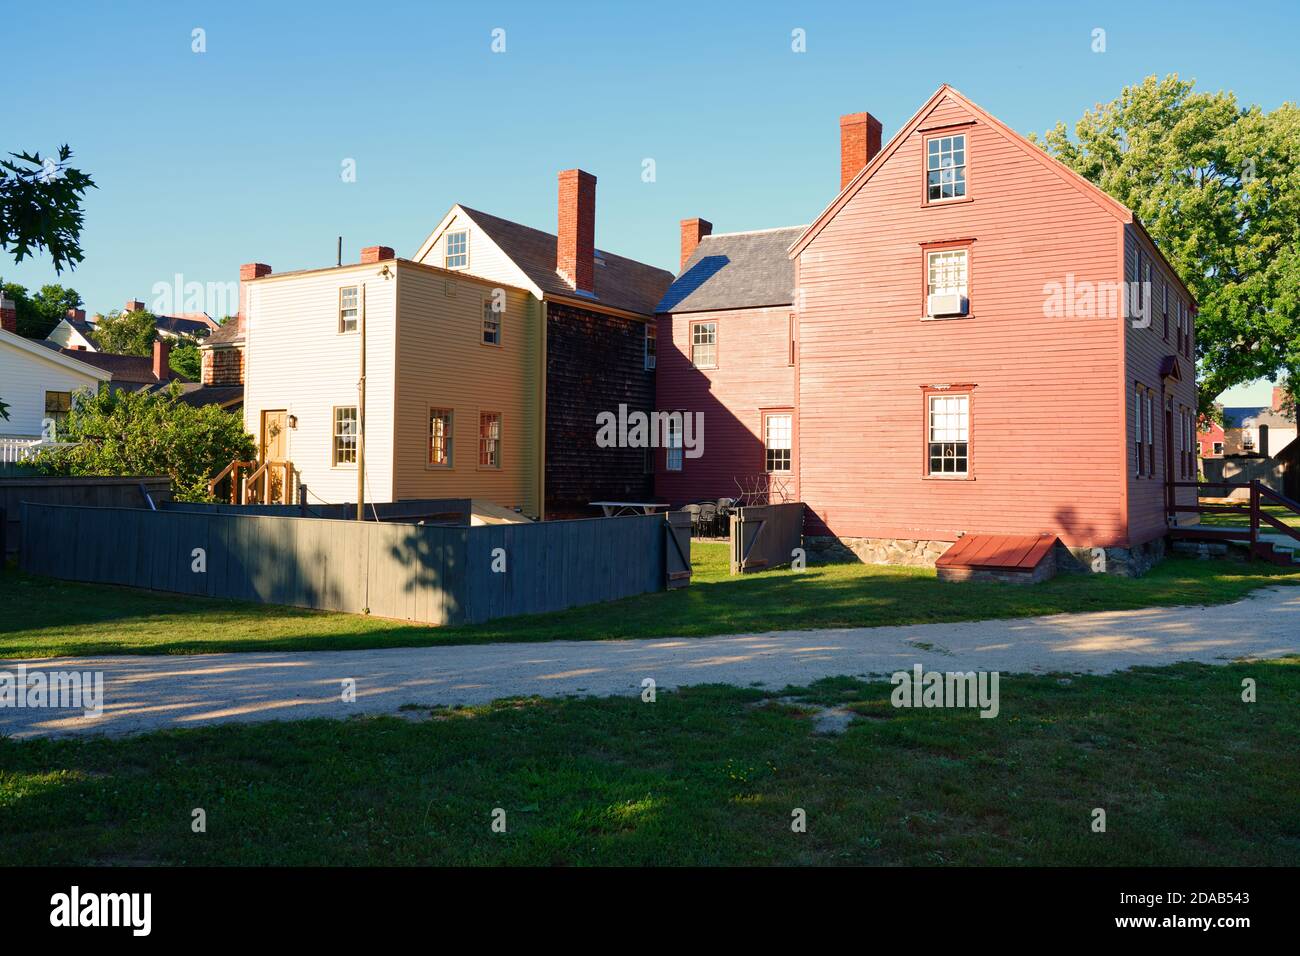 PORTSMOUTH, NH –6 AUG 2020- View of the Strawbery Banke Museum, an outdoor history museum located in the South End historic district of Portsmouth, Ne Stock Photo